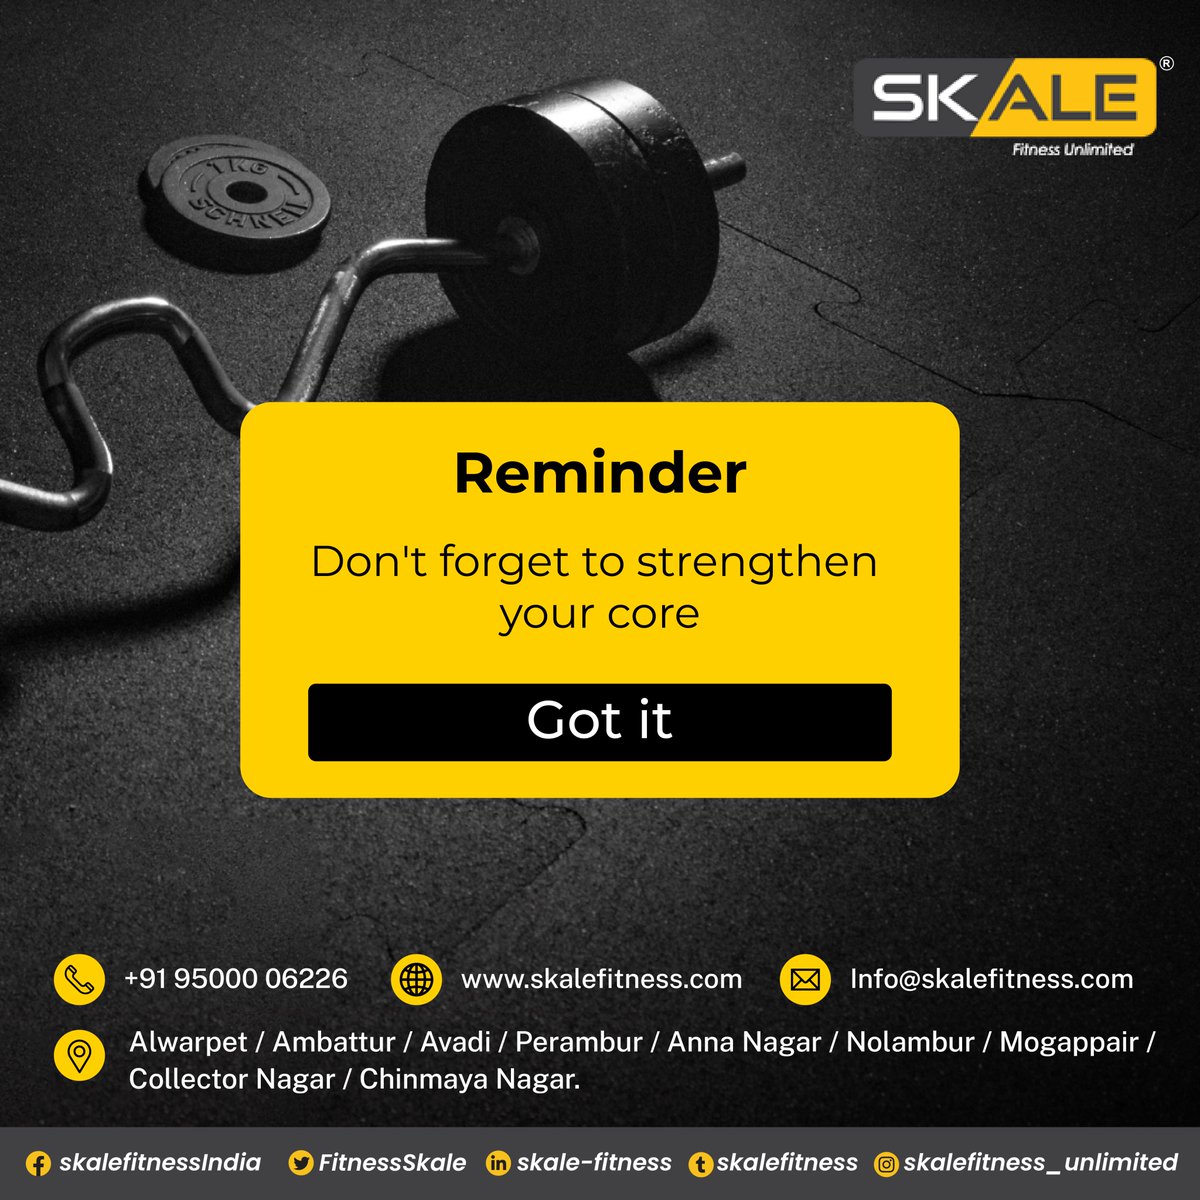 Make fitness a habit and welcome a healthier tomorrow! To Skale Up, reach us @ +91-9500006226 or visit skalefitness.com

#fitnessmotivation #fitnessmodel #fitnessjourney #exercises #exercisemotivation #exercise #competitor #weightlosschallenge #chennaifitness